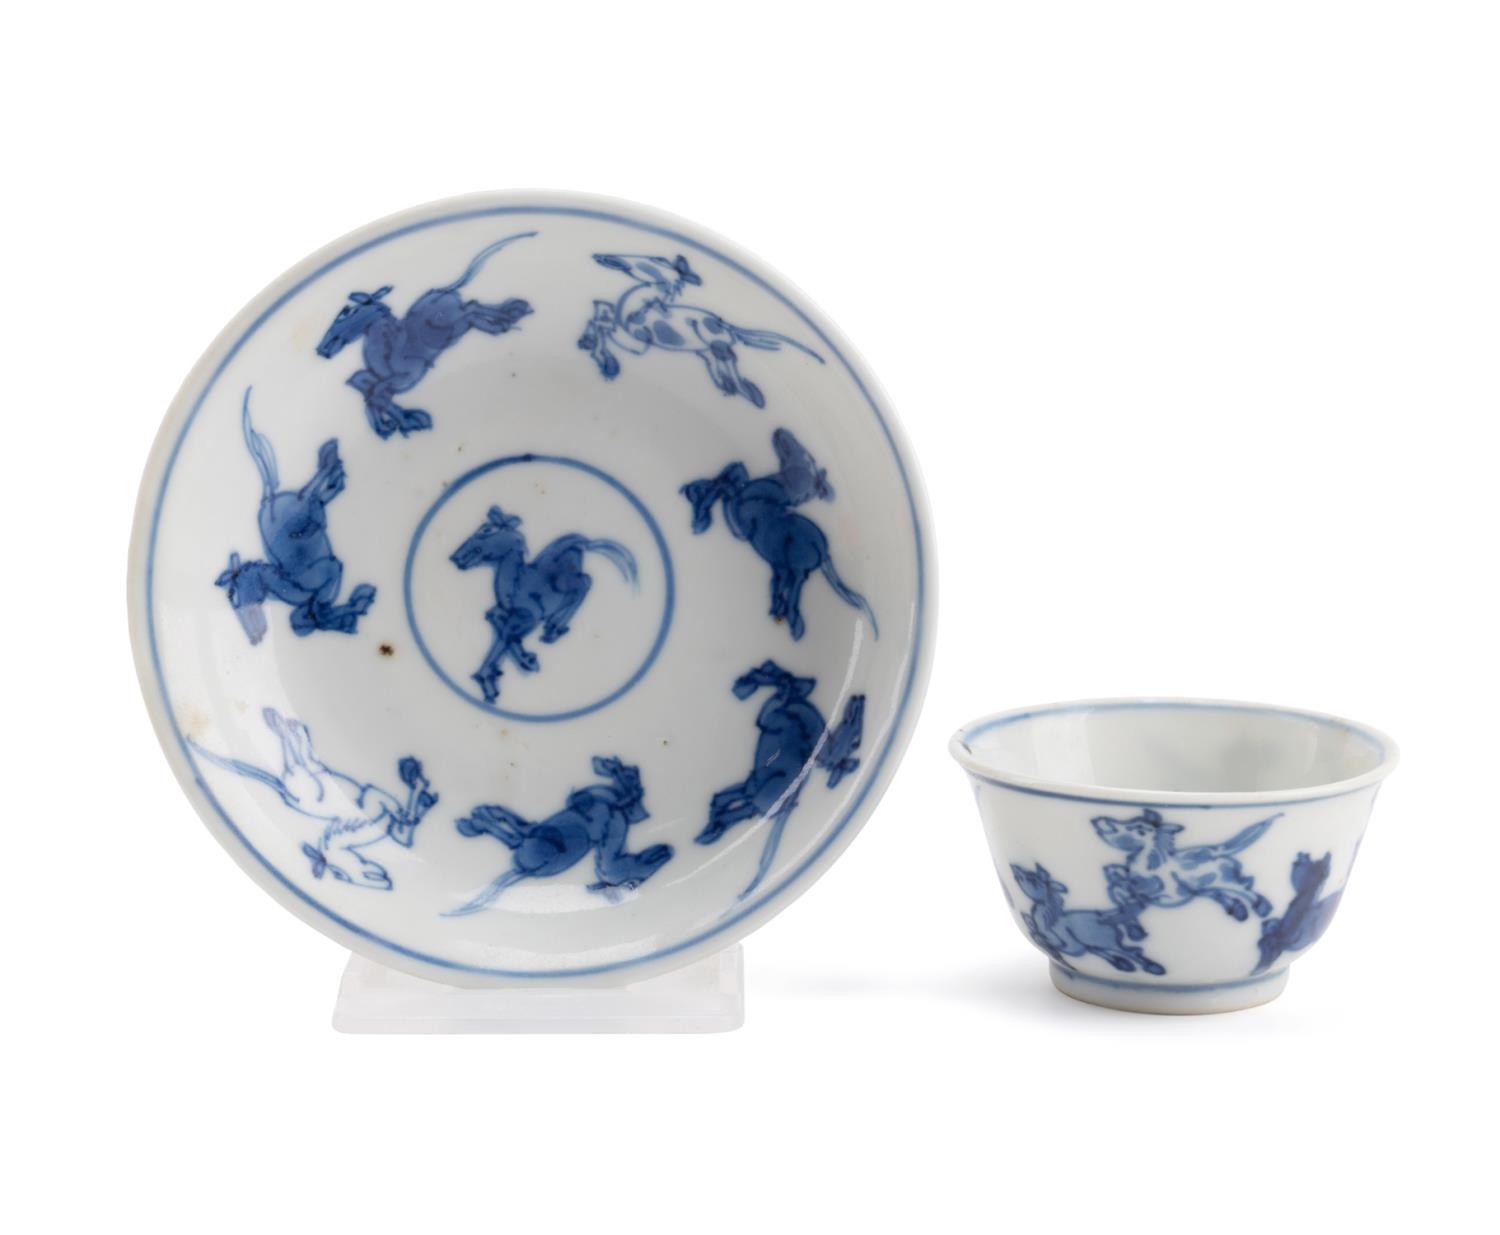 CHINESE 8 HORSES BLUE & WHITE CUP